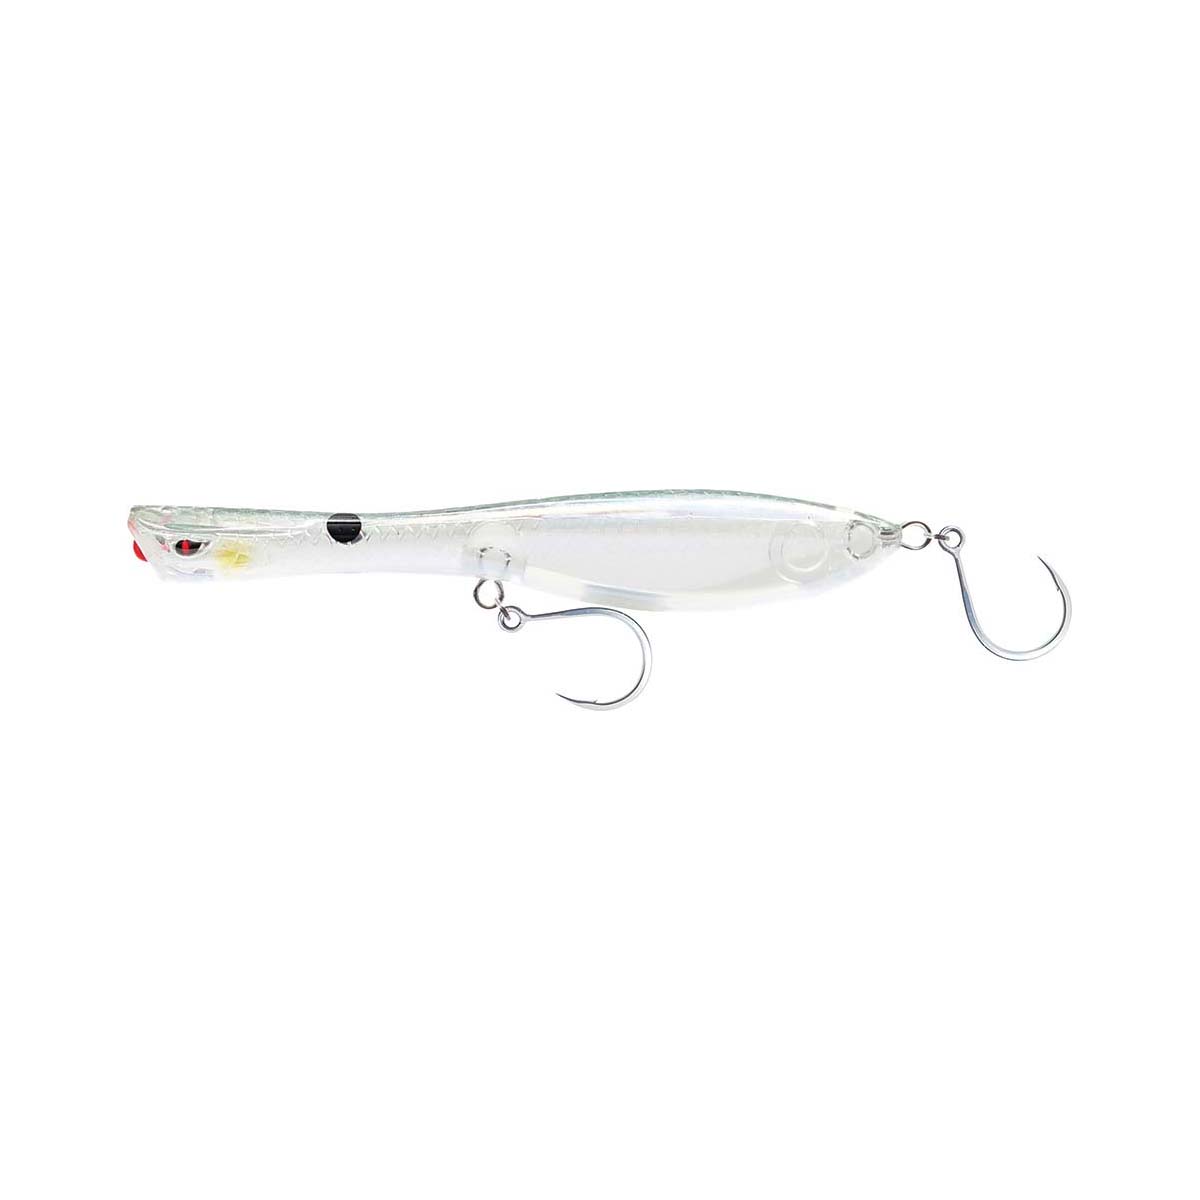 Nomad Dartwing Surface Stickbait Lure 16.5cm F Holo Ghost Shad